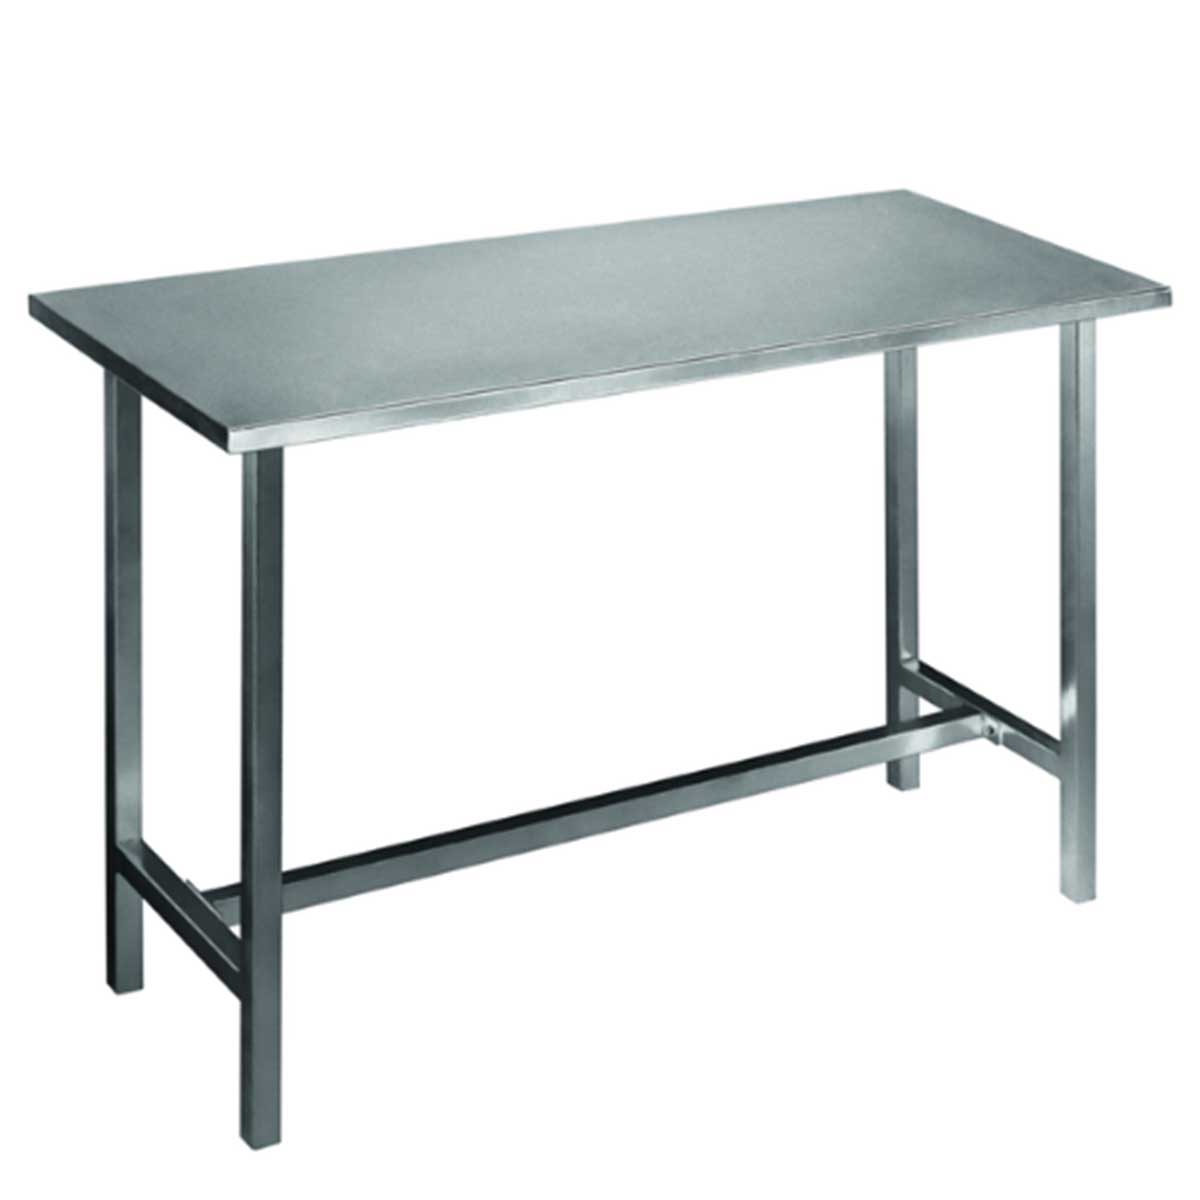 Metal Office Table Manufacturers, Suppliers in Nizamuddin